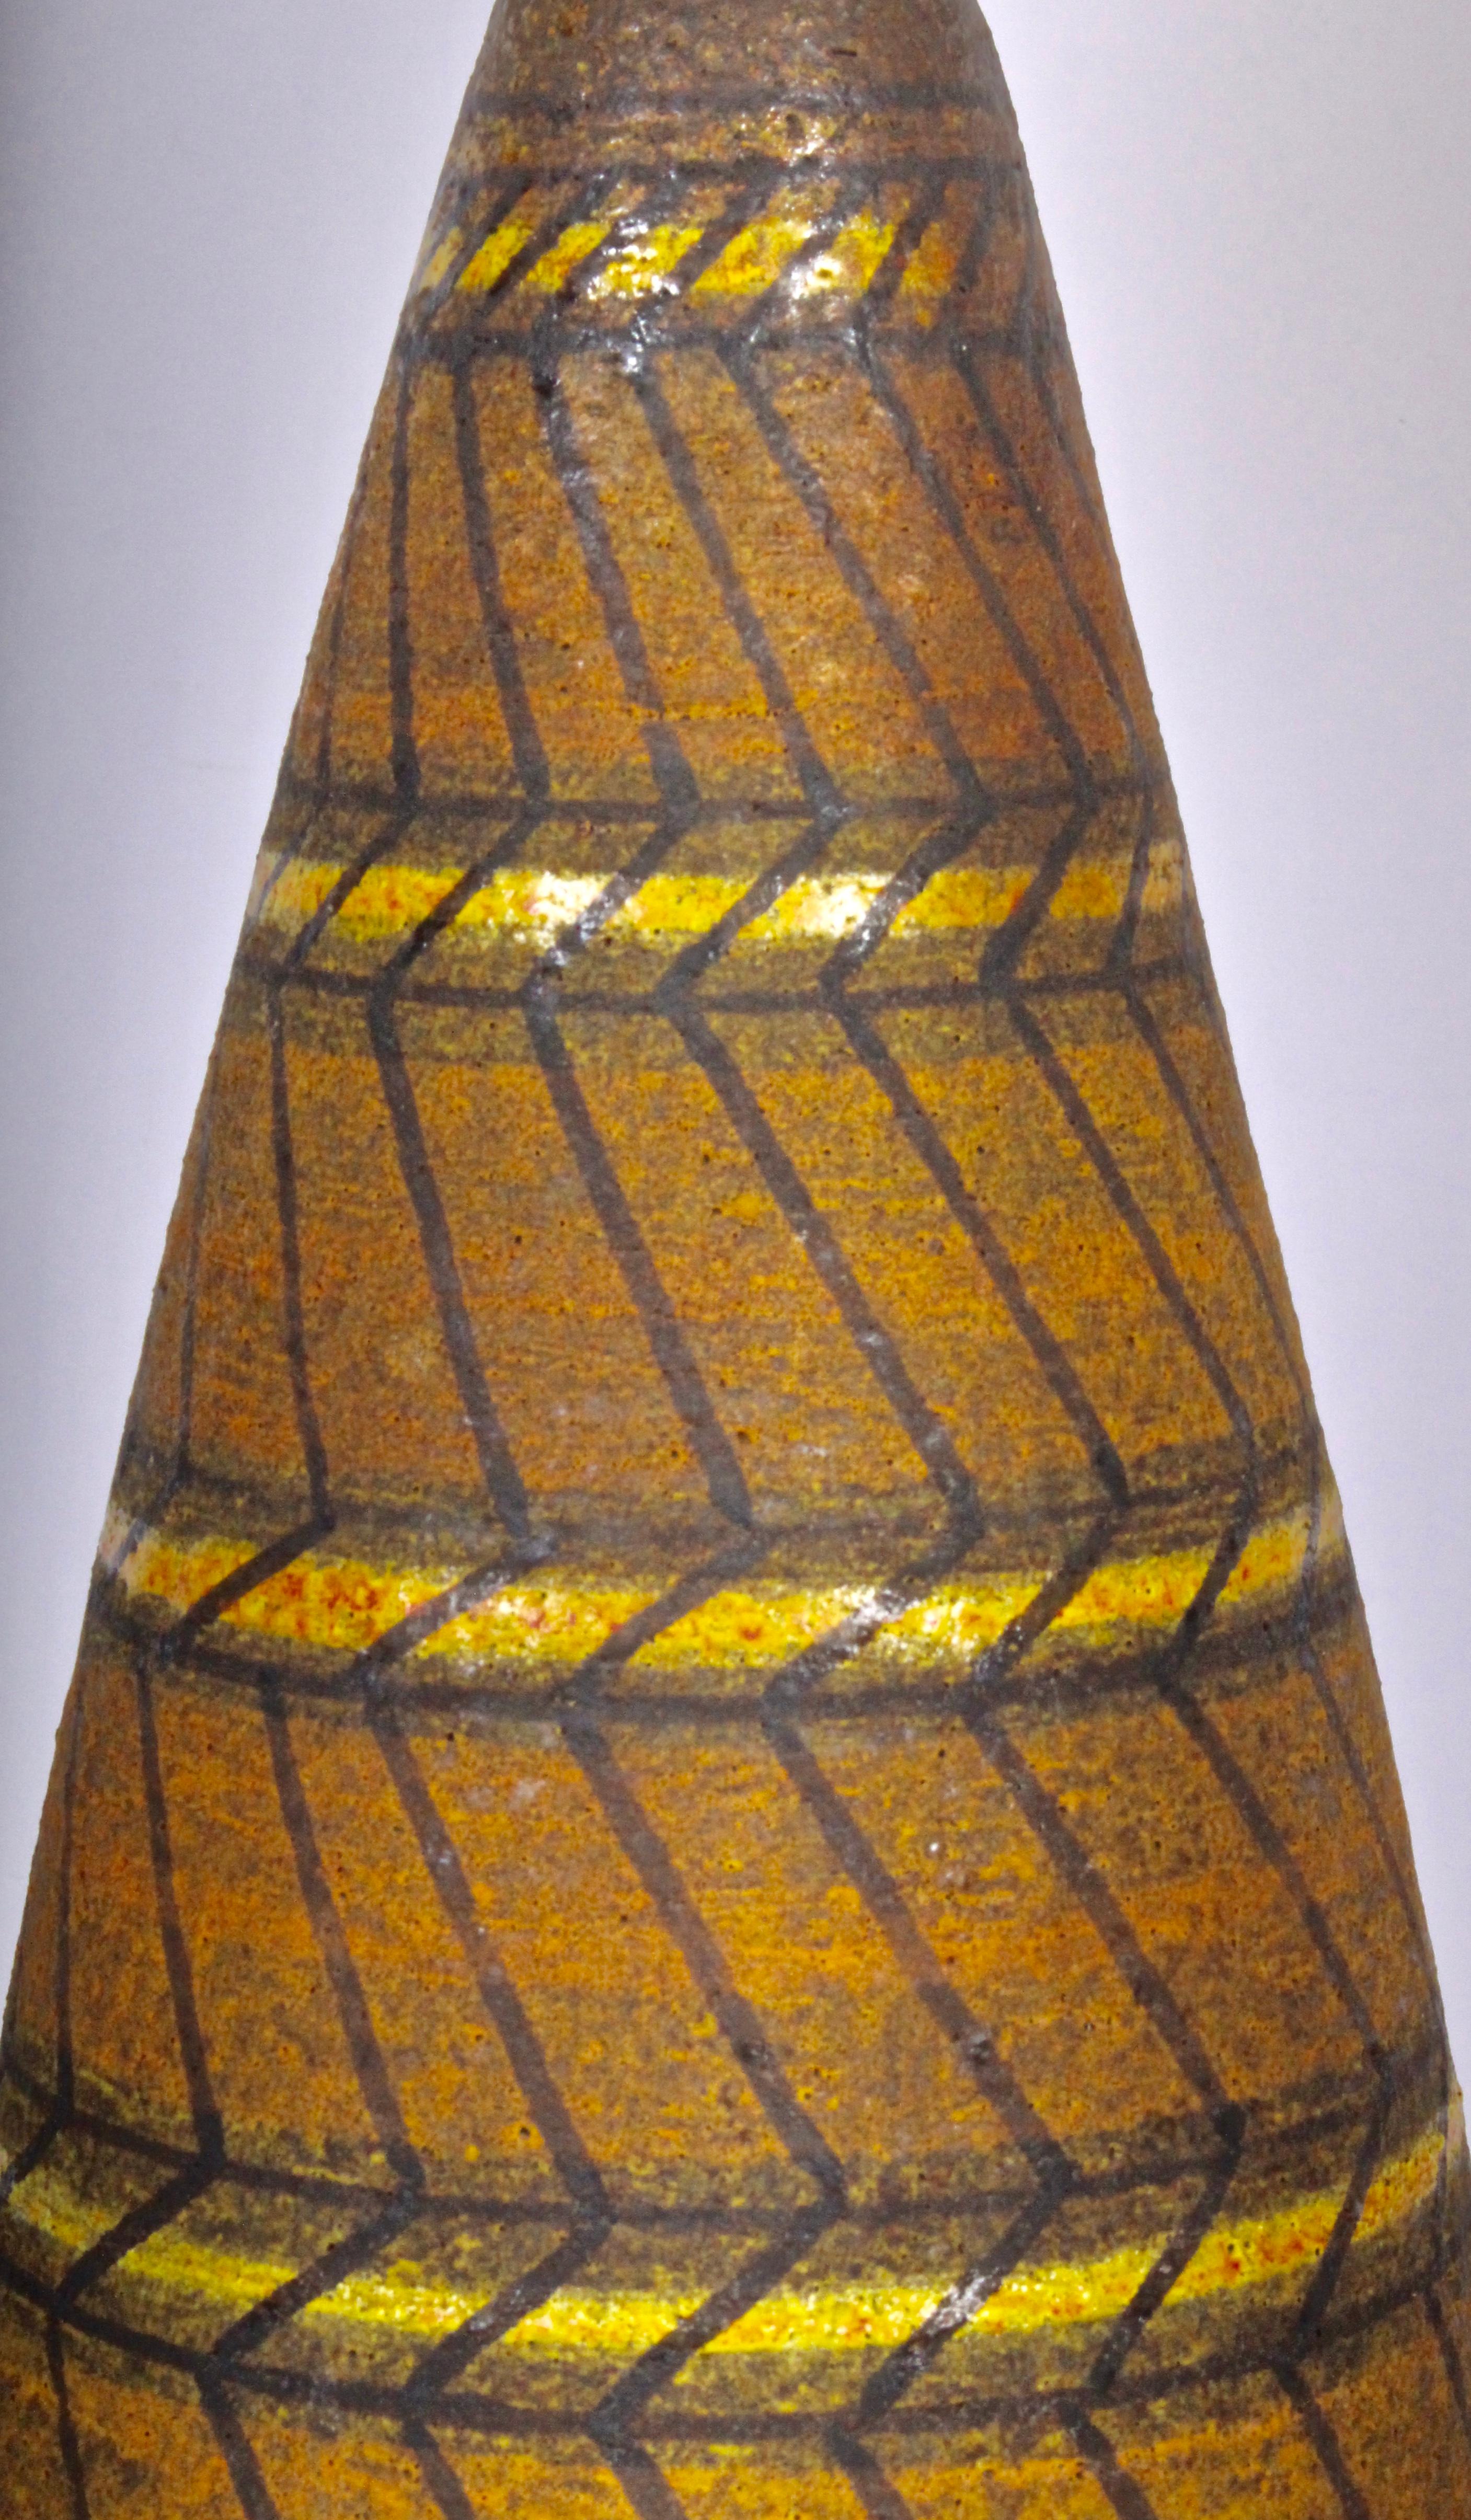 Glazed Aldo Londi Geometric Cocoa Art Pottery Table Lamp Hand Painted in Yellow, 1950s For Sale